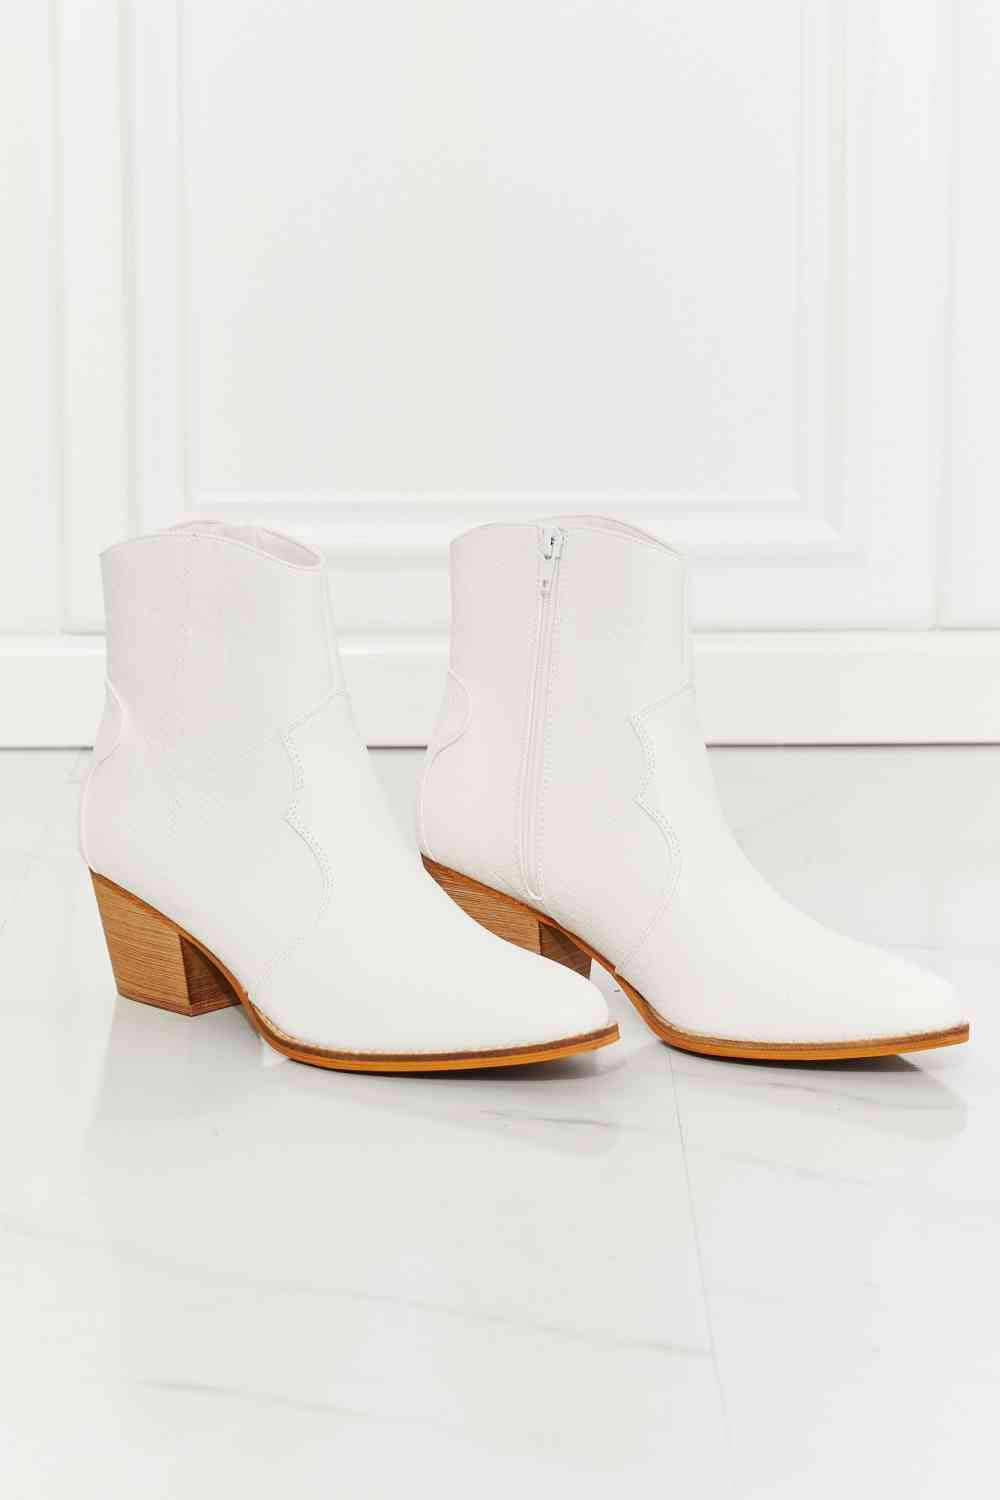 Western Ivory Ankle Vegan Leather Womens Boots | Hypoallergenic - Allergy Friendly - Naturally Free